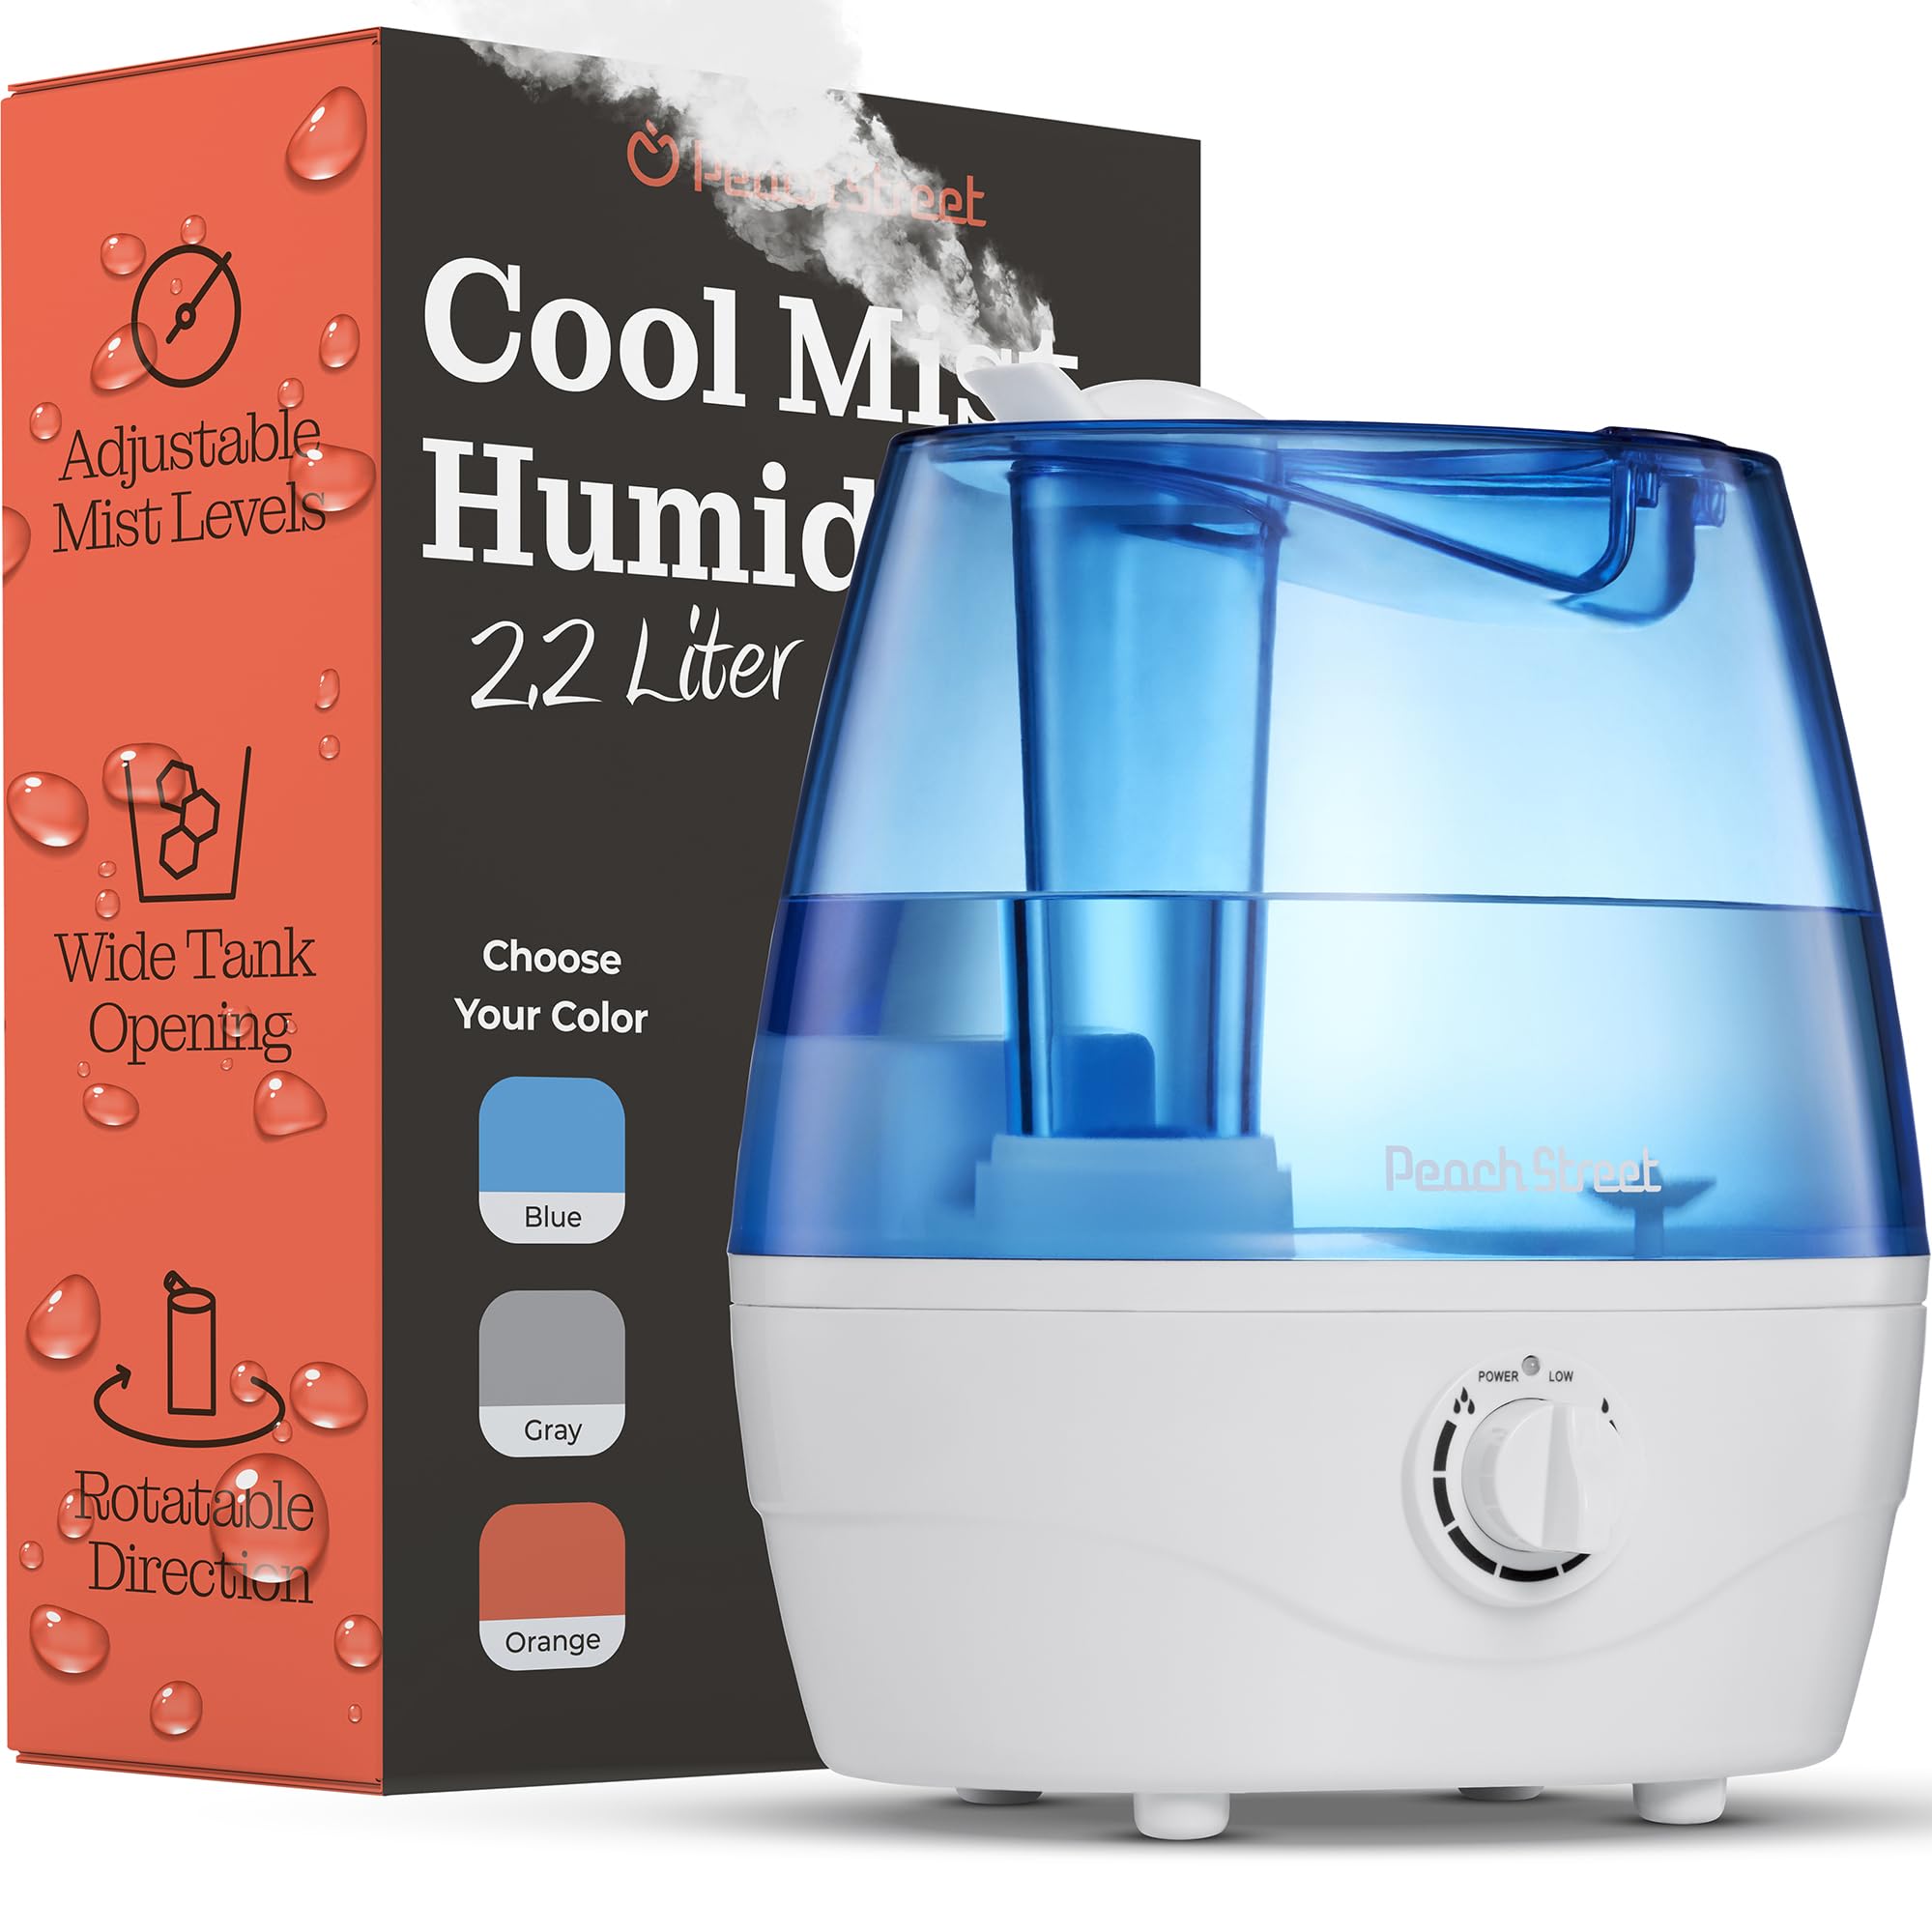 peach street Cool Mist Humidifiers for Bedroom - 2.2L Water Tank, Baby, Office, Quiet Ultrasonic Air Vaporizer, Adjustable Mist Level, 360 No